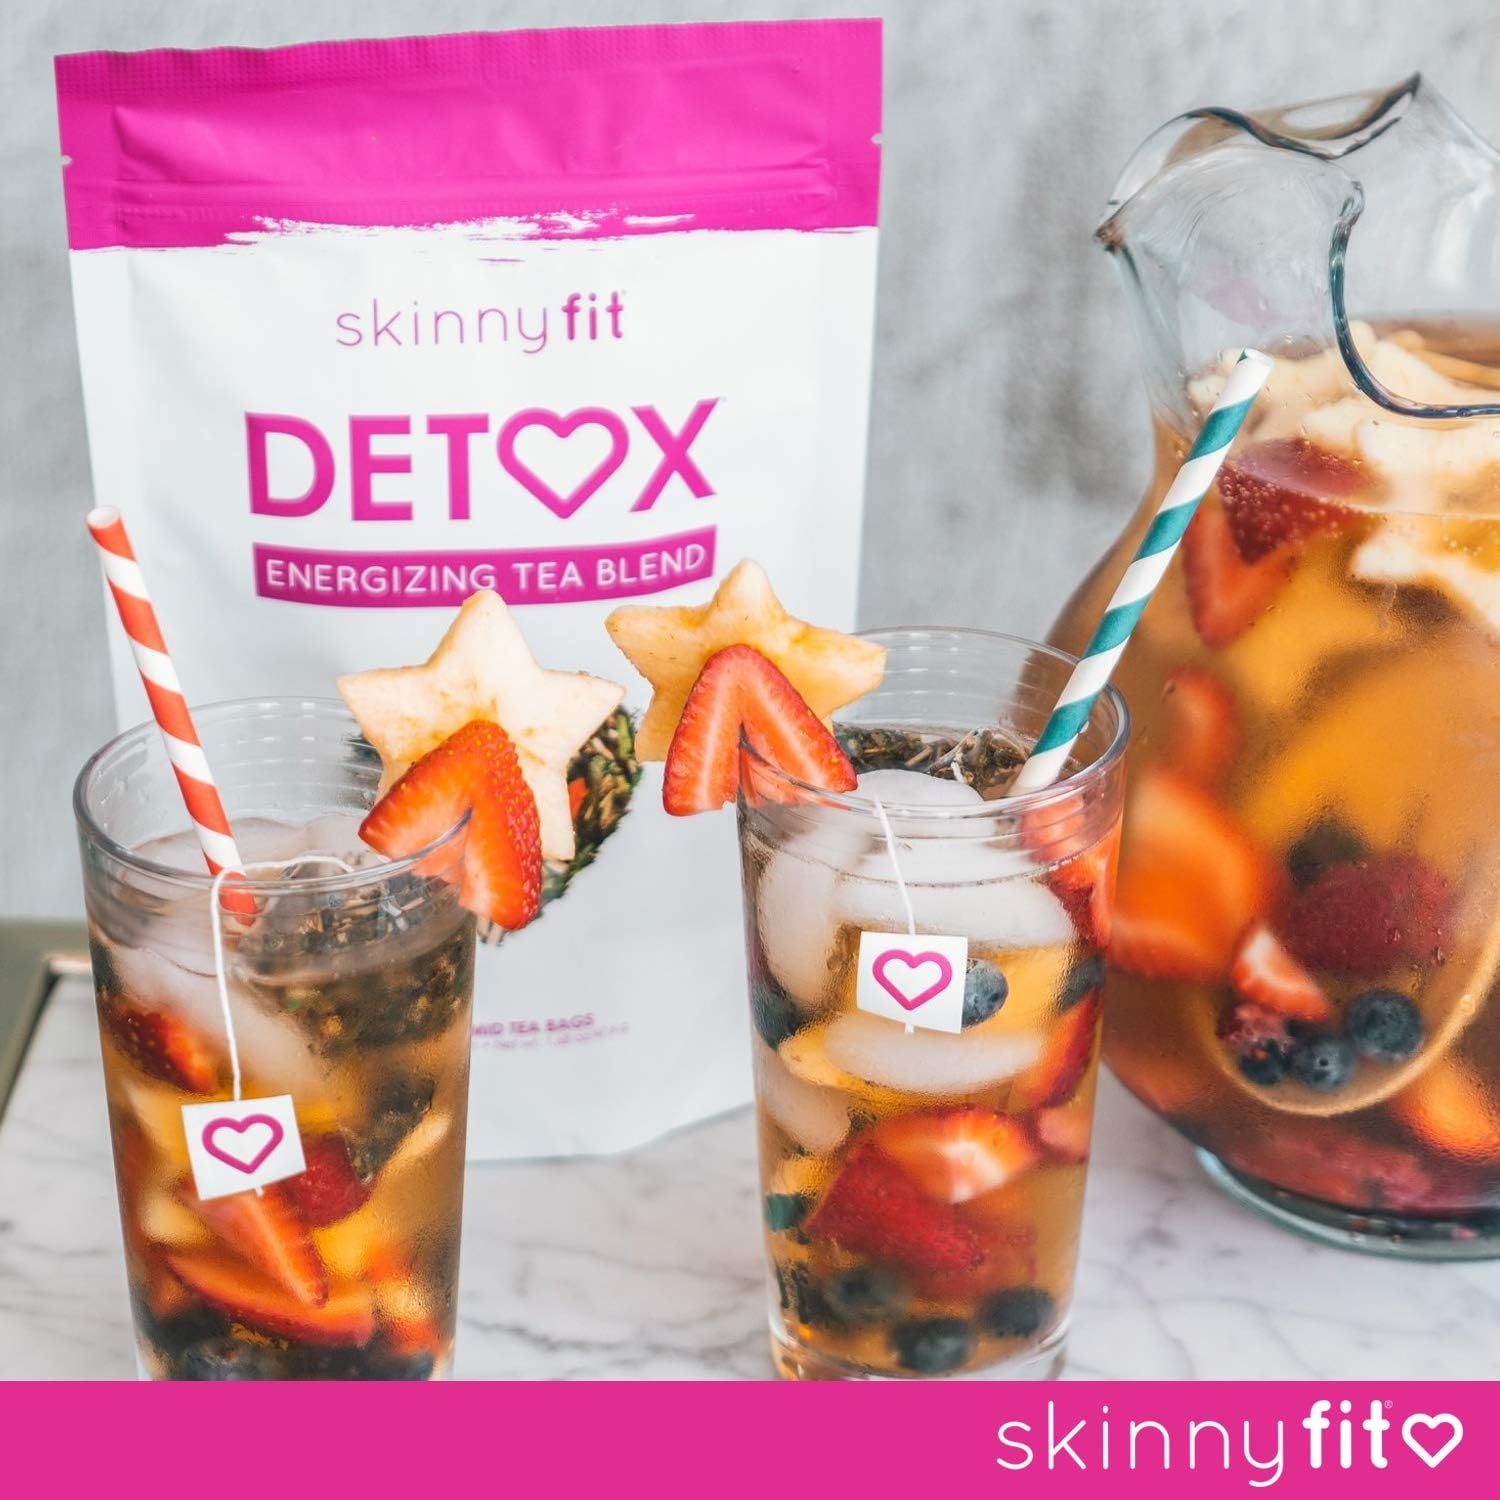 SkinnyFit Detox Tea: All-Natural, Laxative-Free, Supports A Healthy Weight, Helps Reduce Bloating, Natural Energy, Supports Immune System, Vegan, 28 Servings